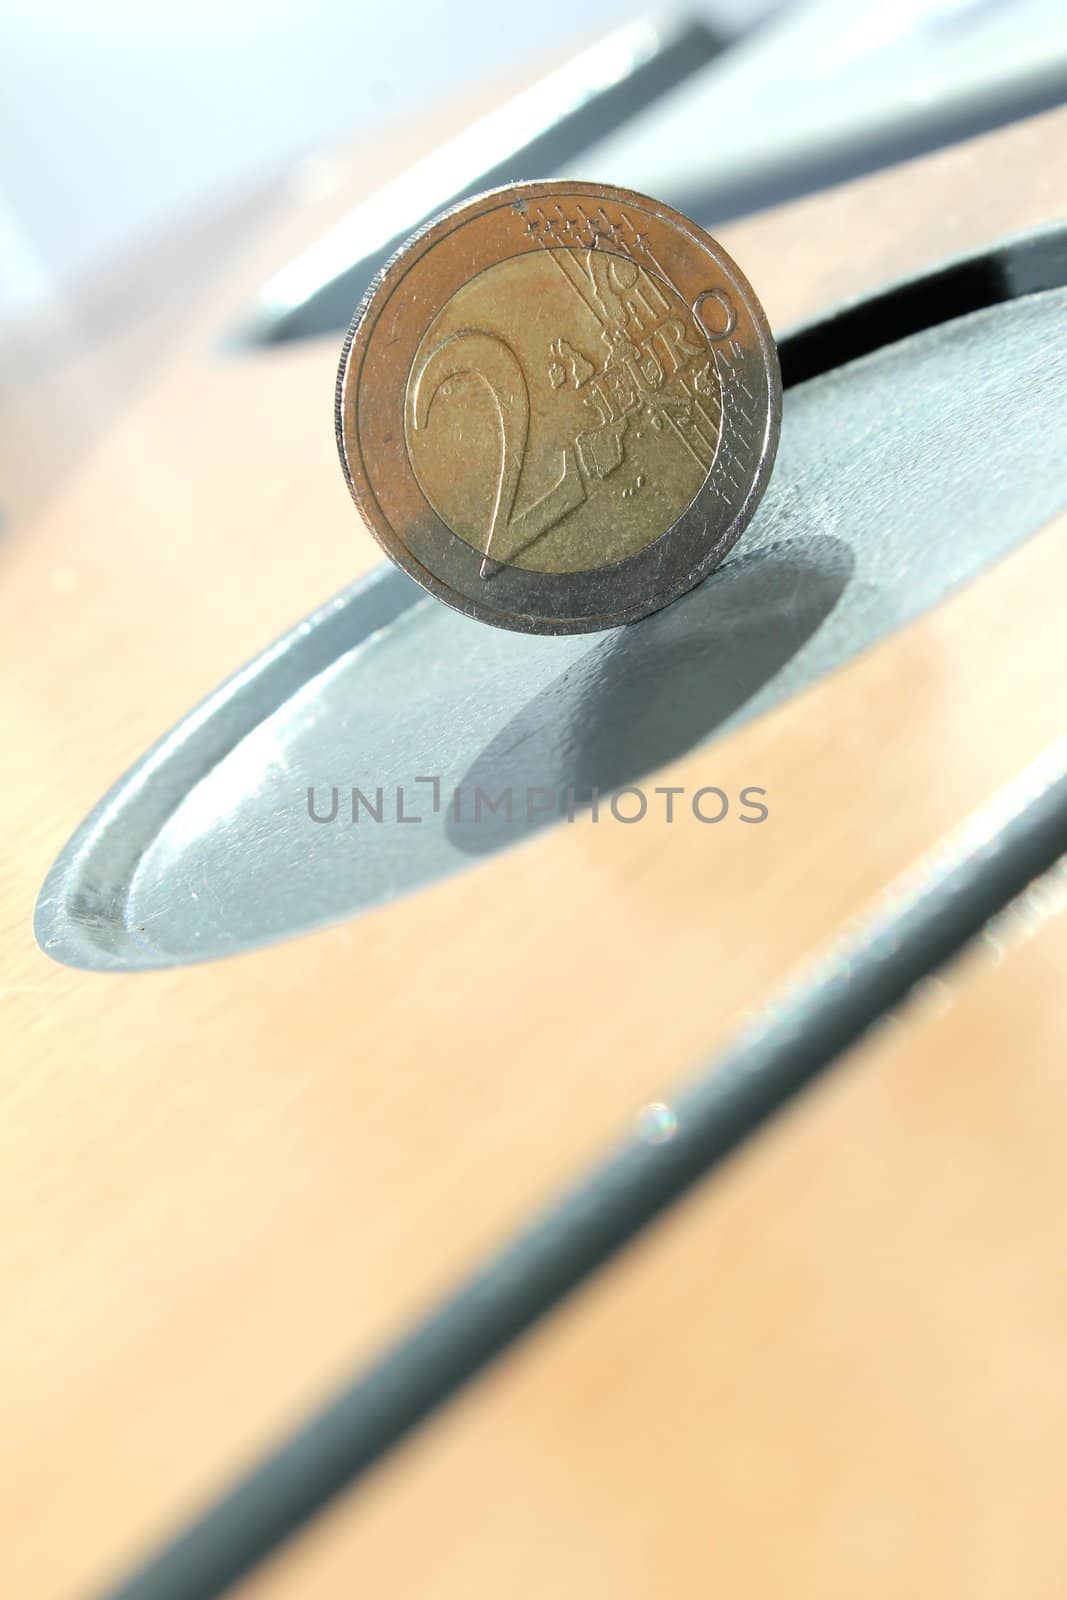 two euro coin by Teka77